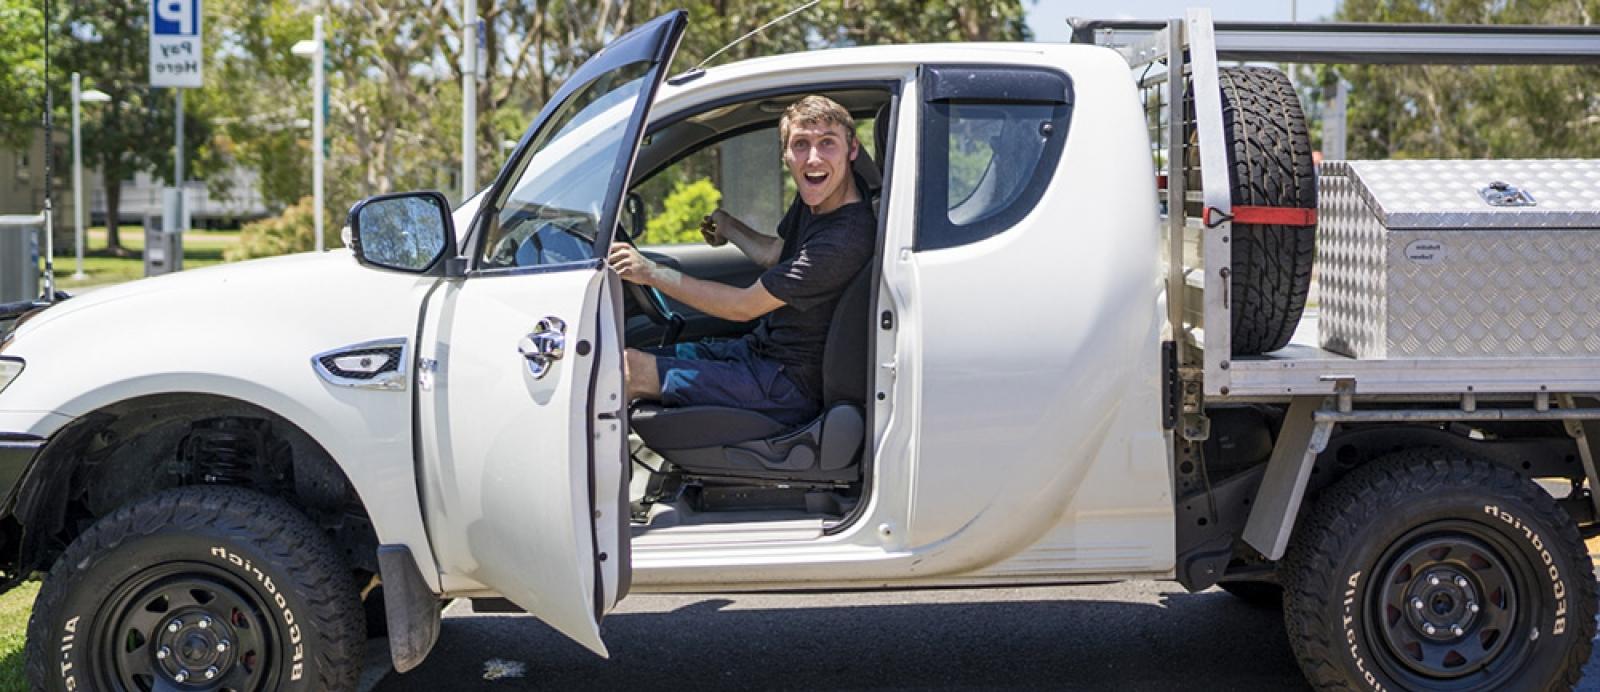 Young man with a disability is driving a ute and smiling